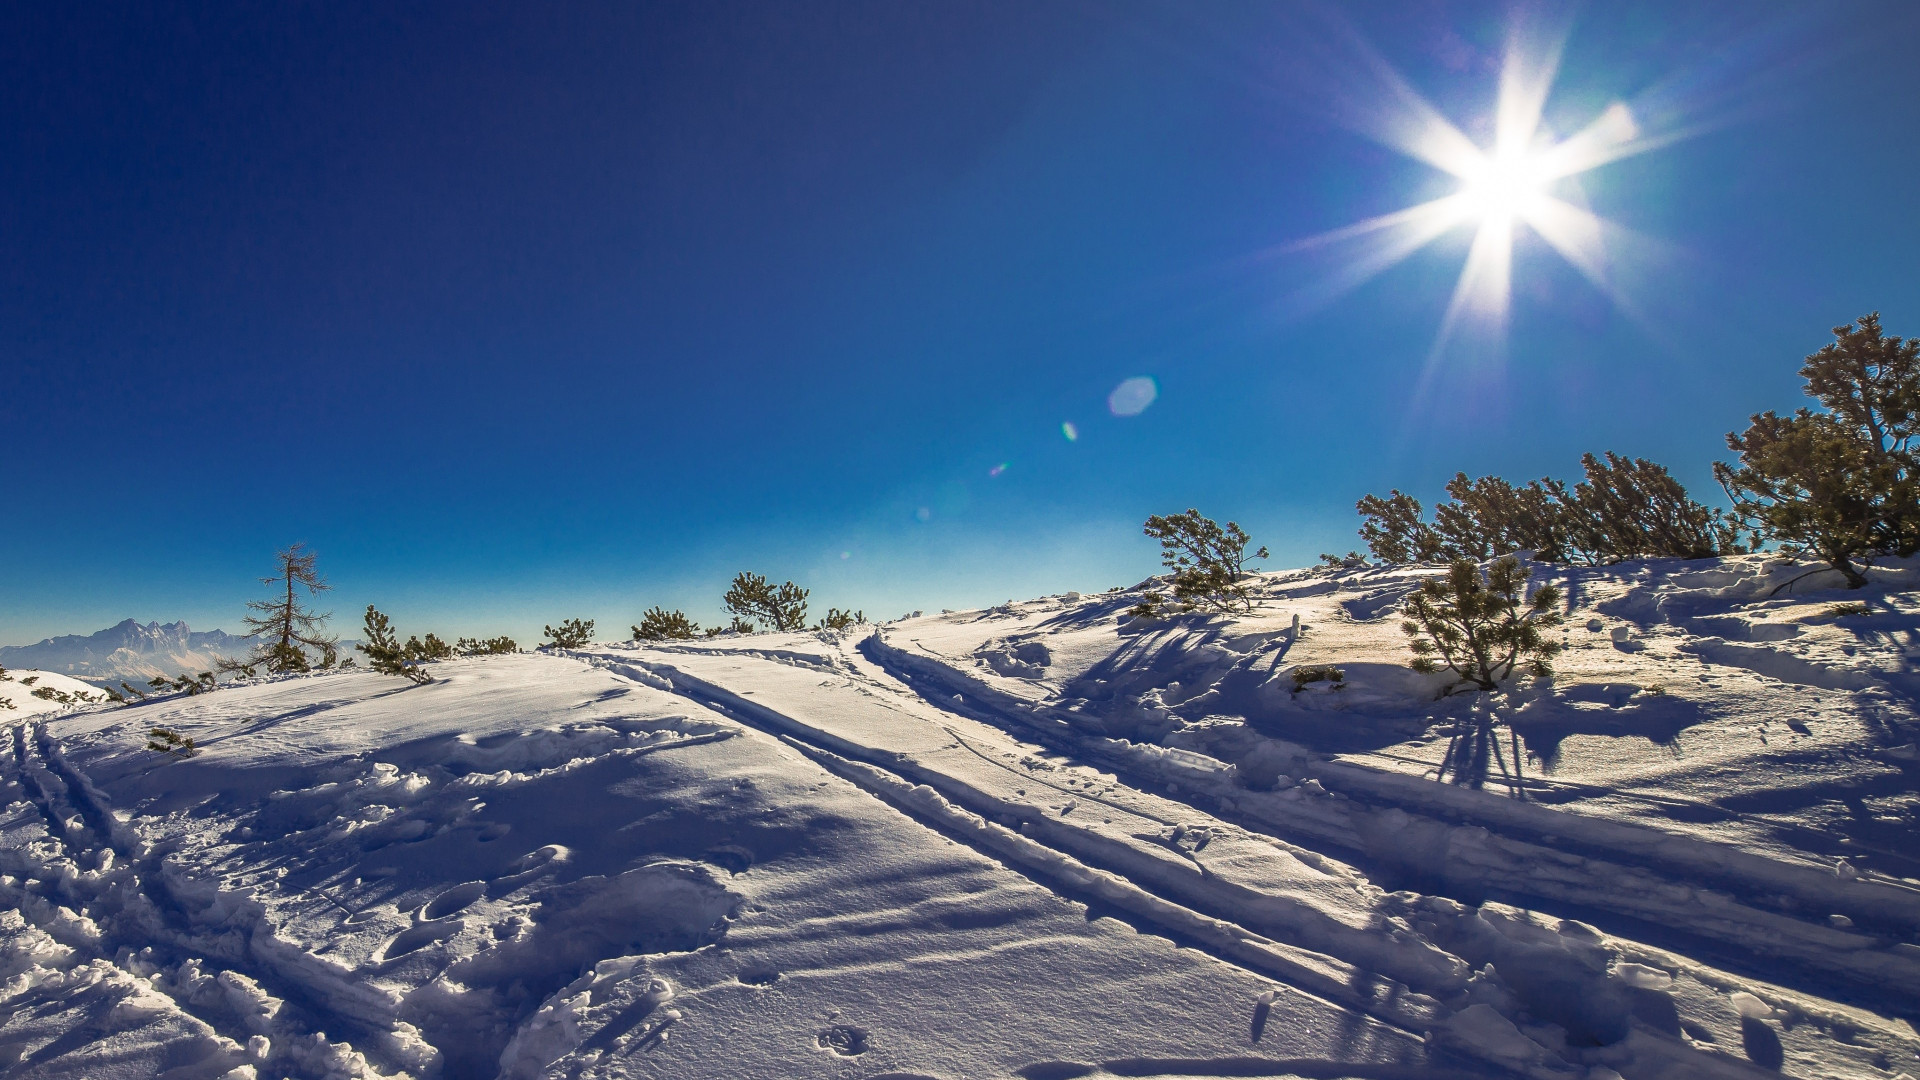 Sunny day in this Winter landscape wallpaper 1920x1080